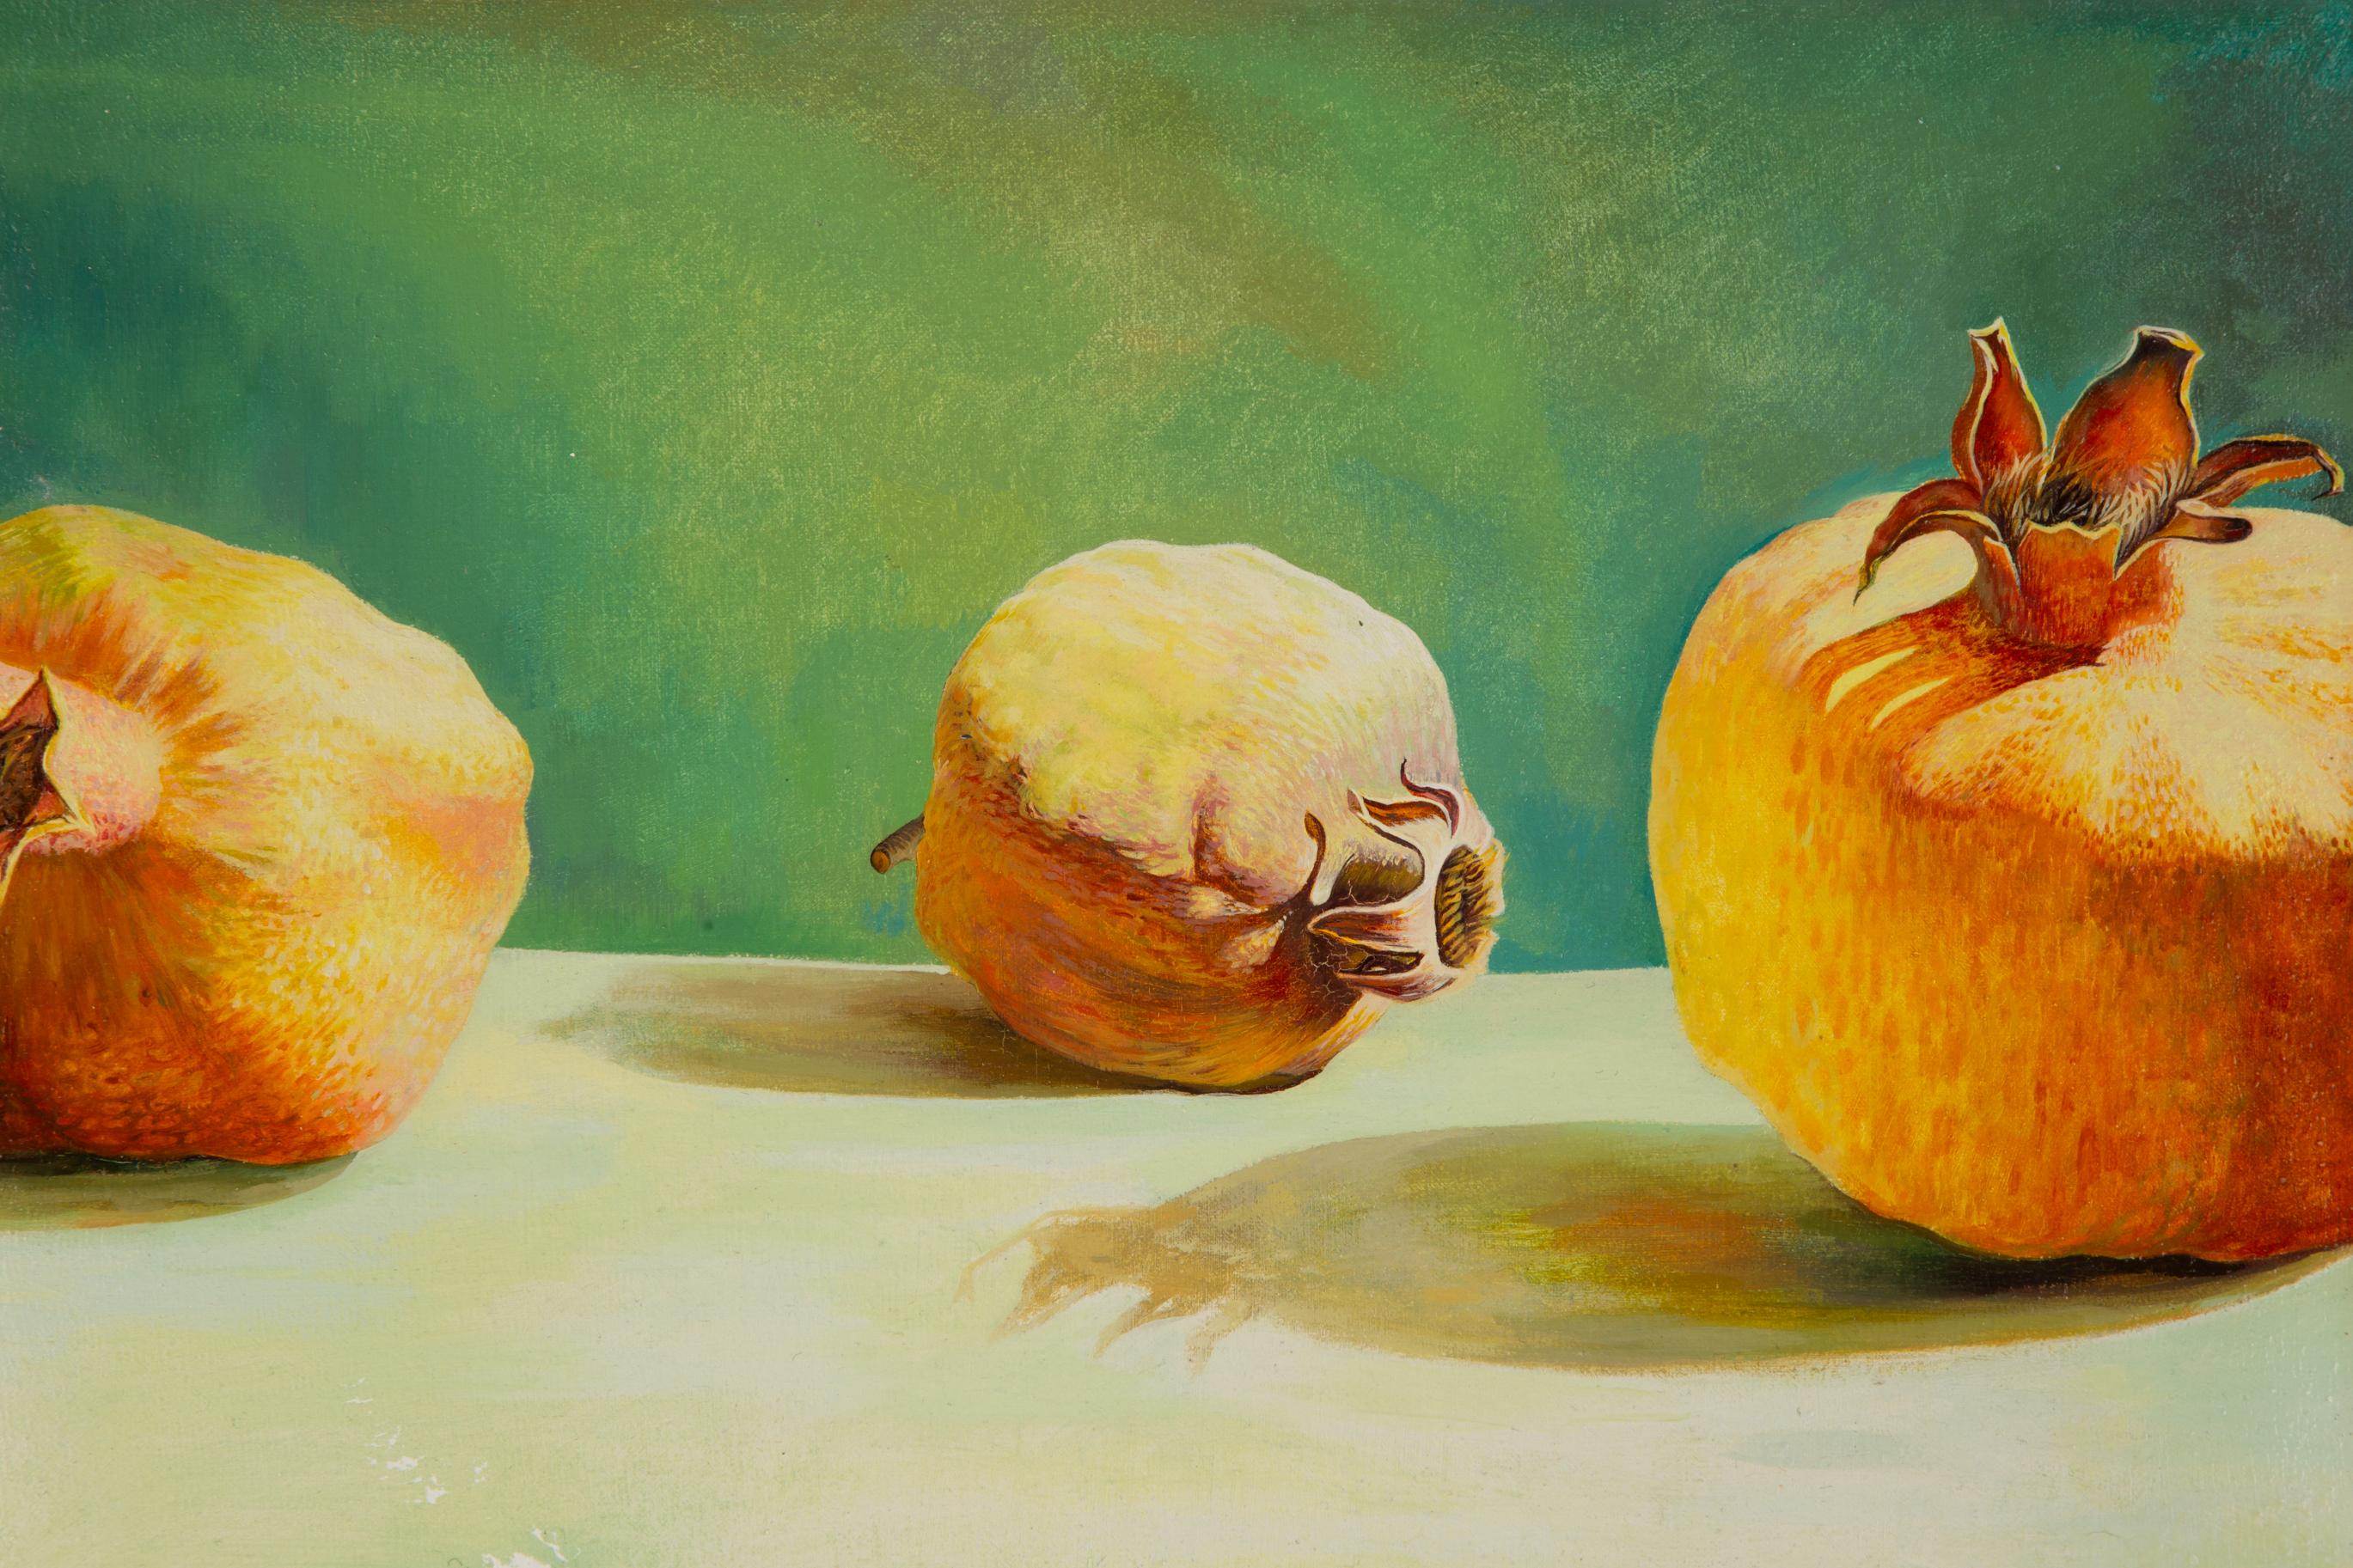 Title: Three Pomegranates
Medium: Oil on canvas
Size: 12 x 16 inches
Frame: Framing options available!
Condition: The painting appears to be in excellent condition.
Note: This painting is unstretched
Year: 2000 Circa
Artist: Lin Xu
Signature: